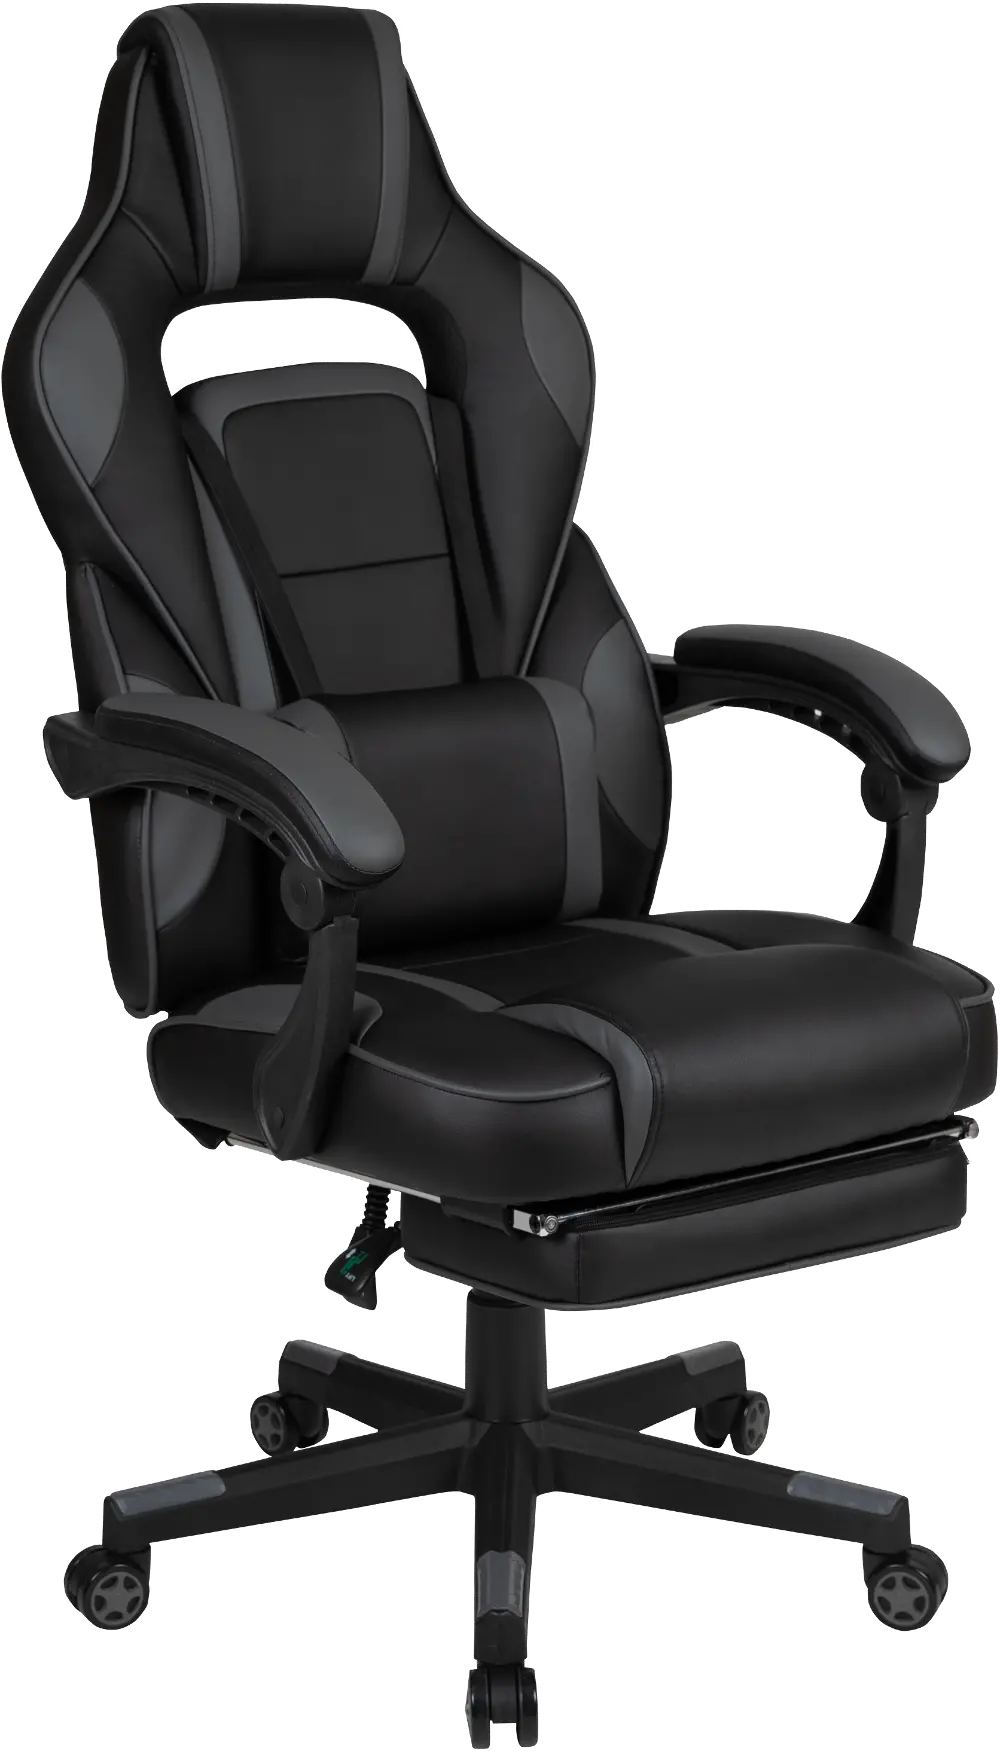 Gray and Black Gaming Swivel Chair - X40-1